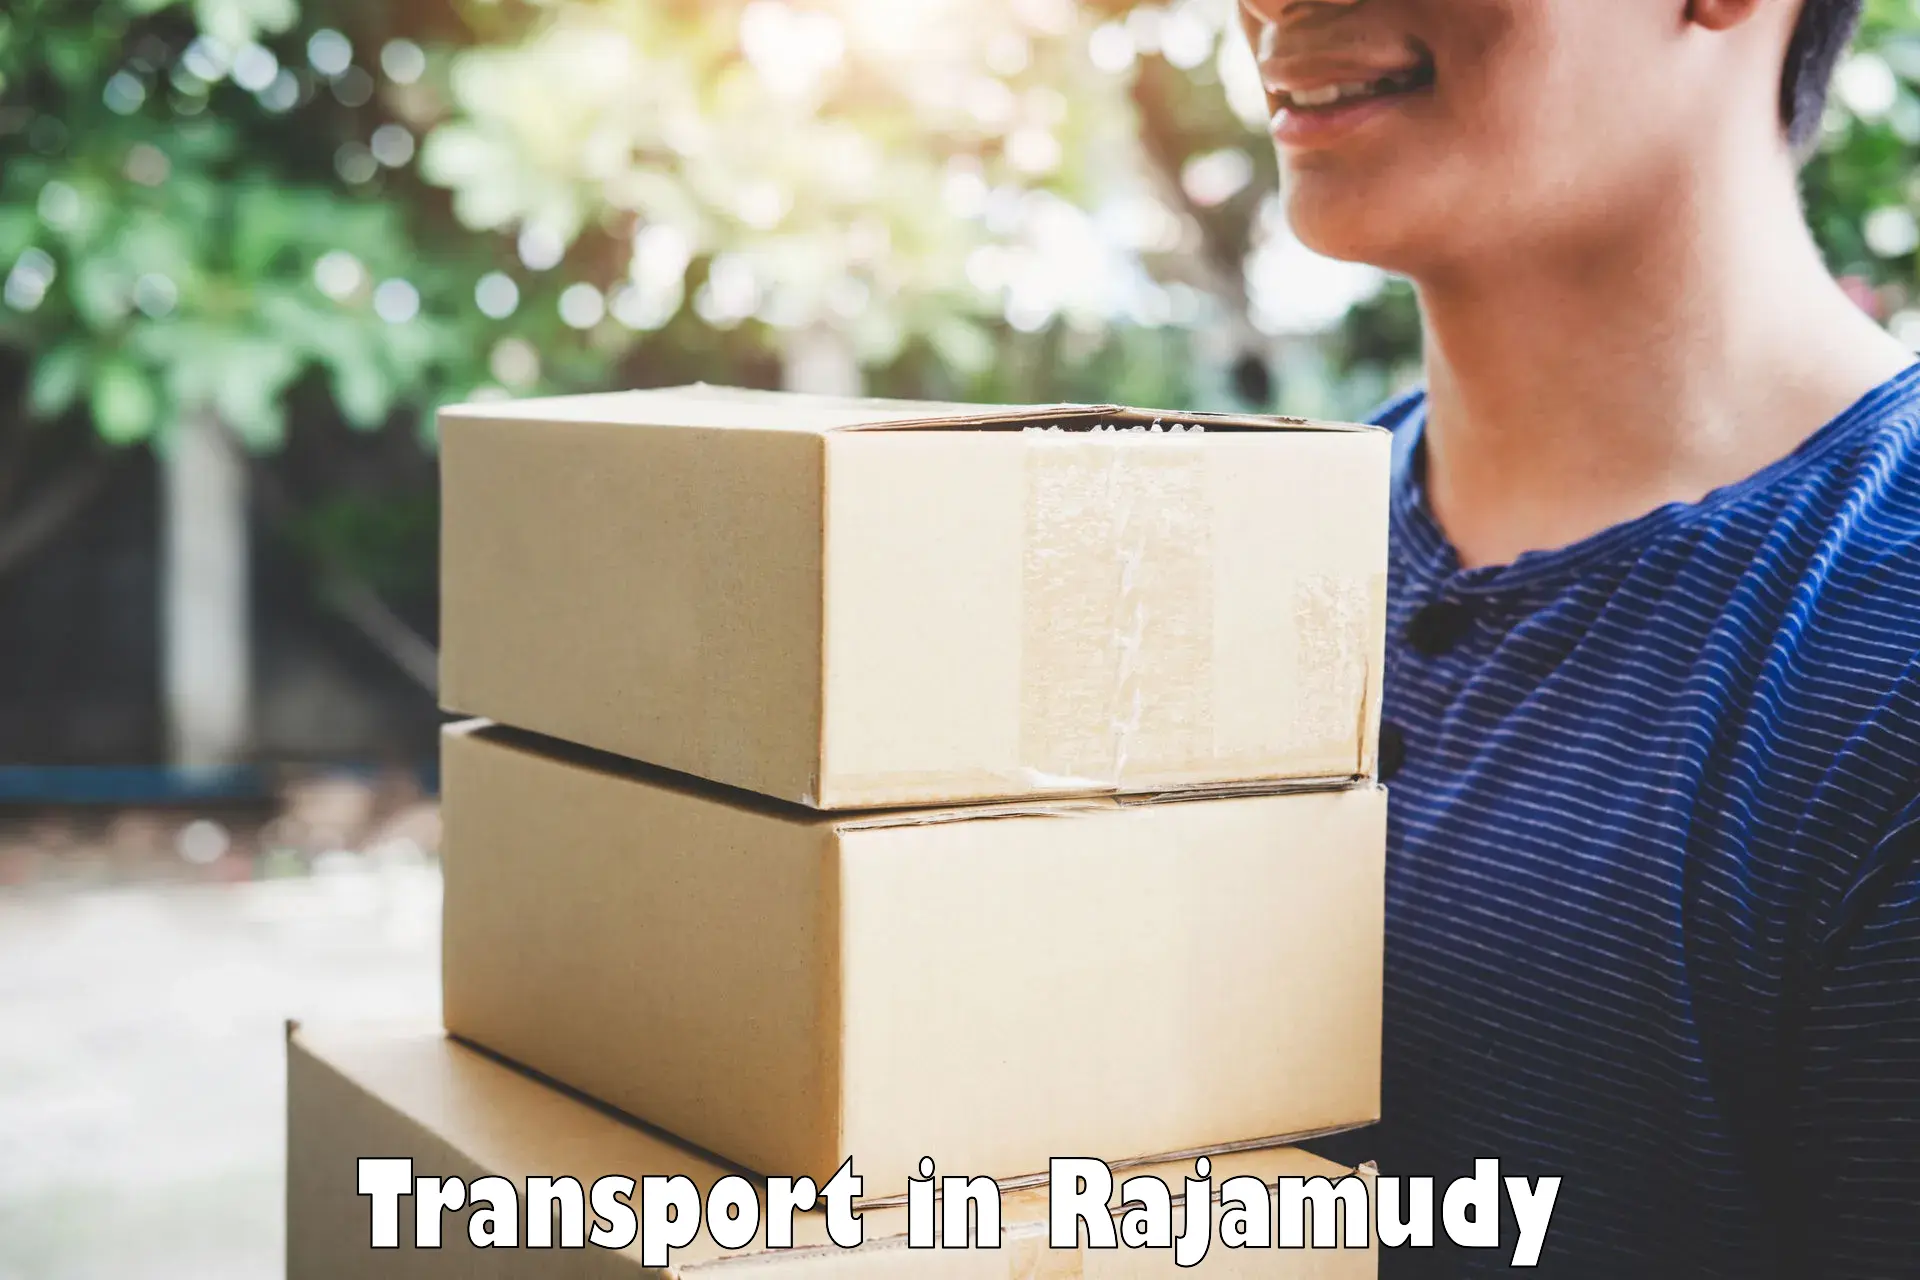 Package delivery services in Rajamudy